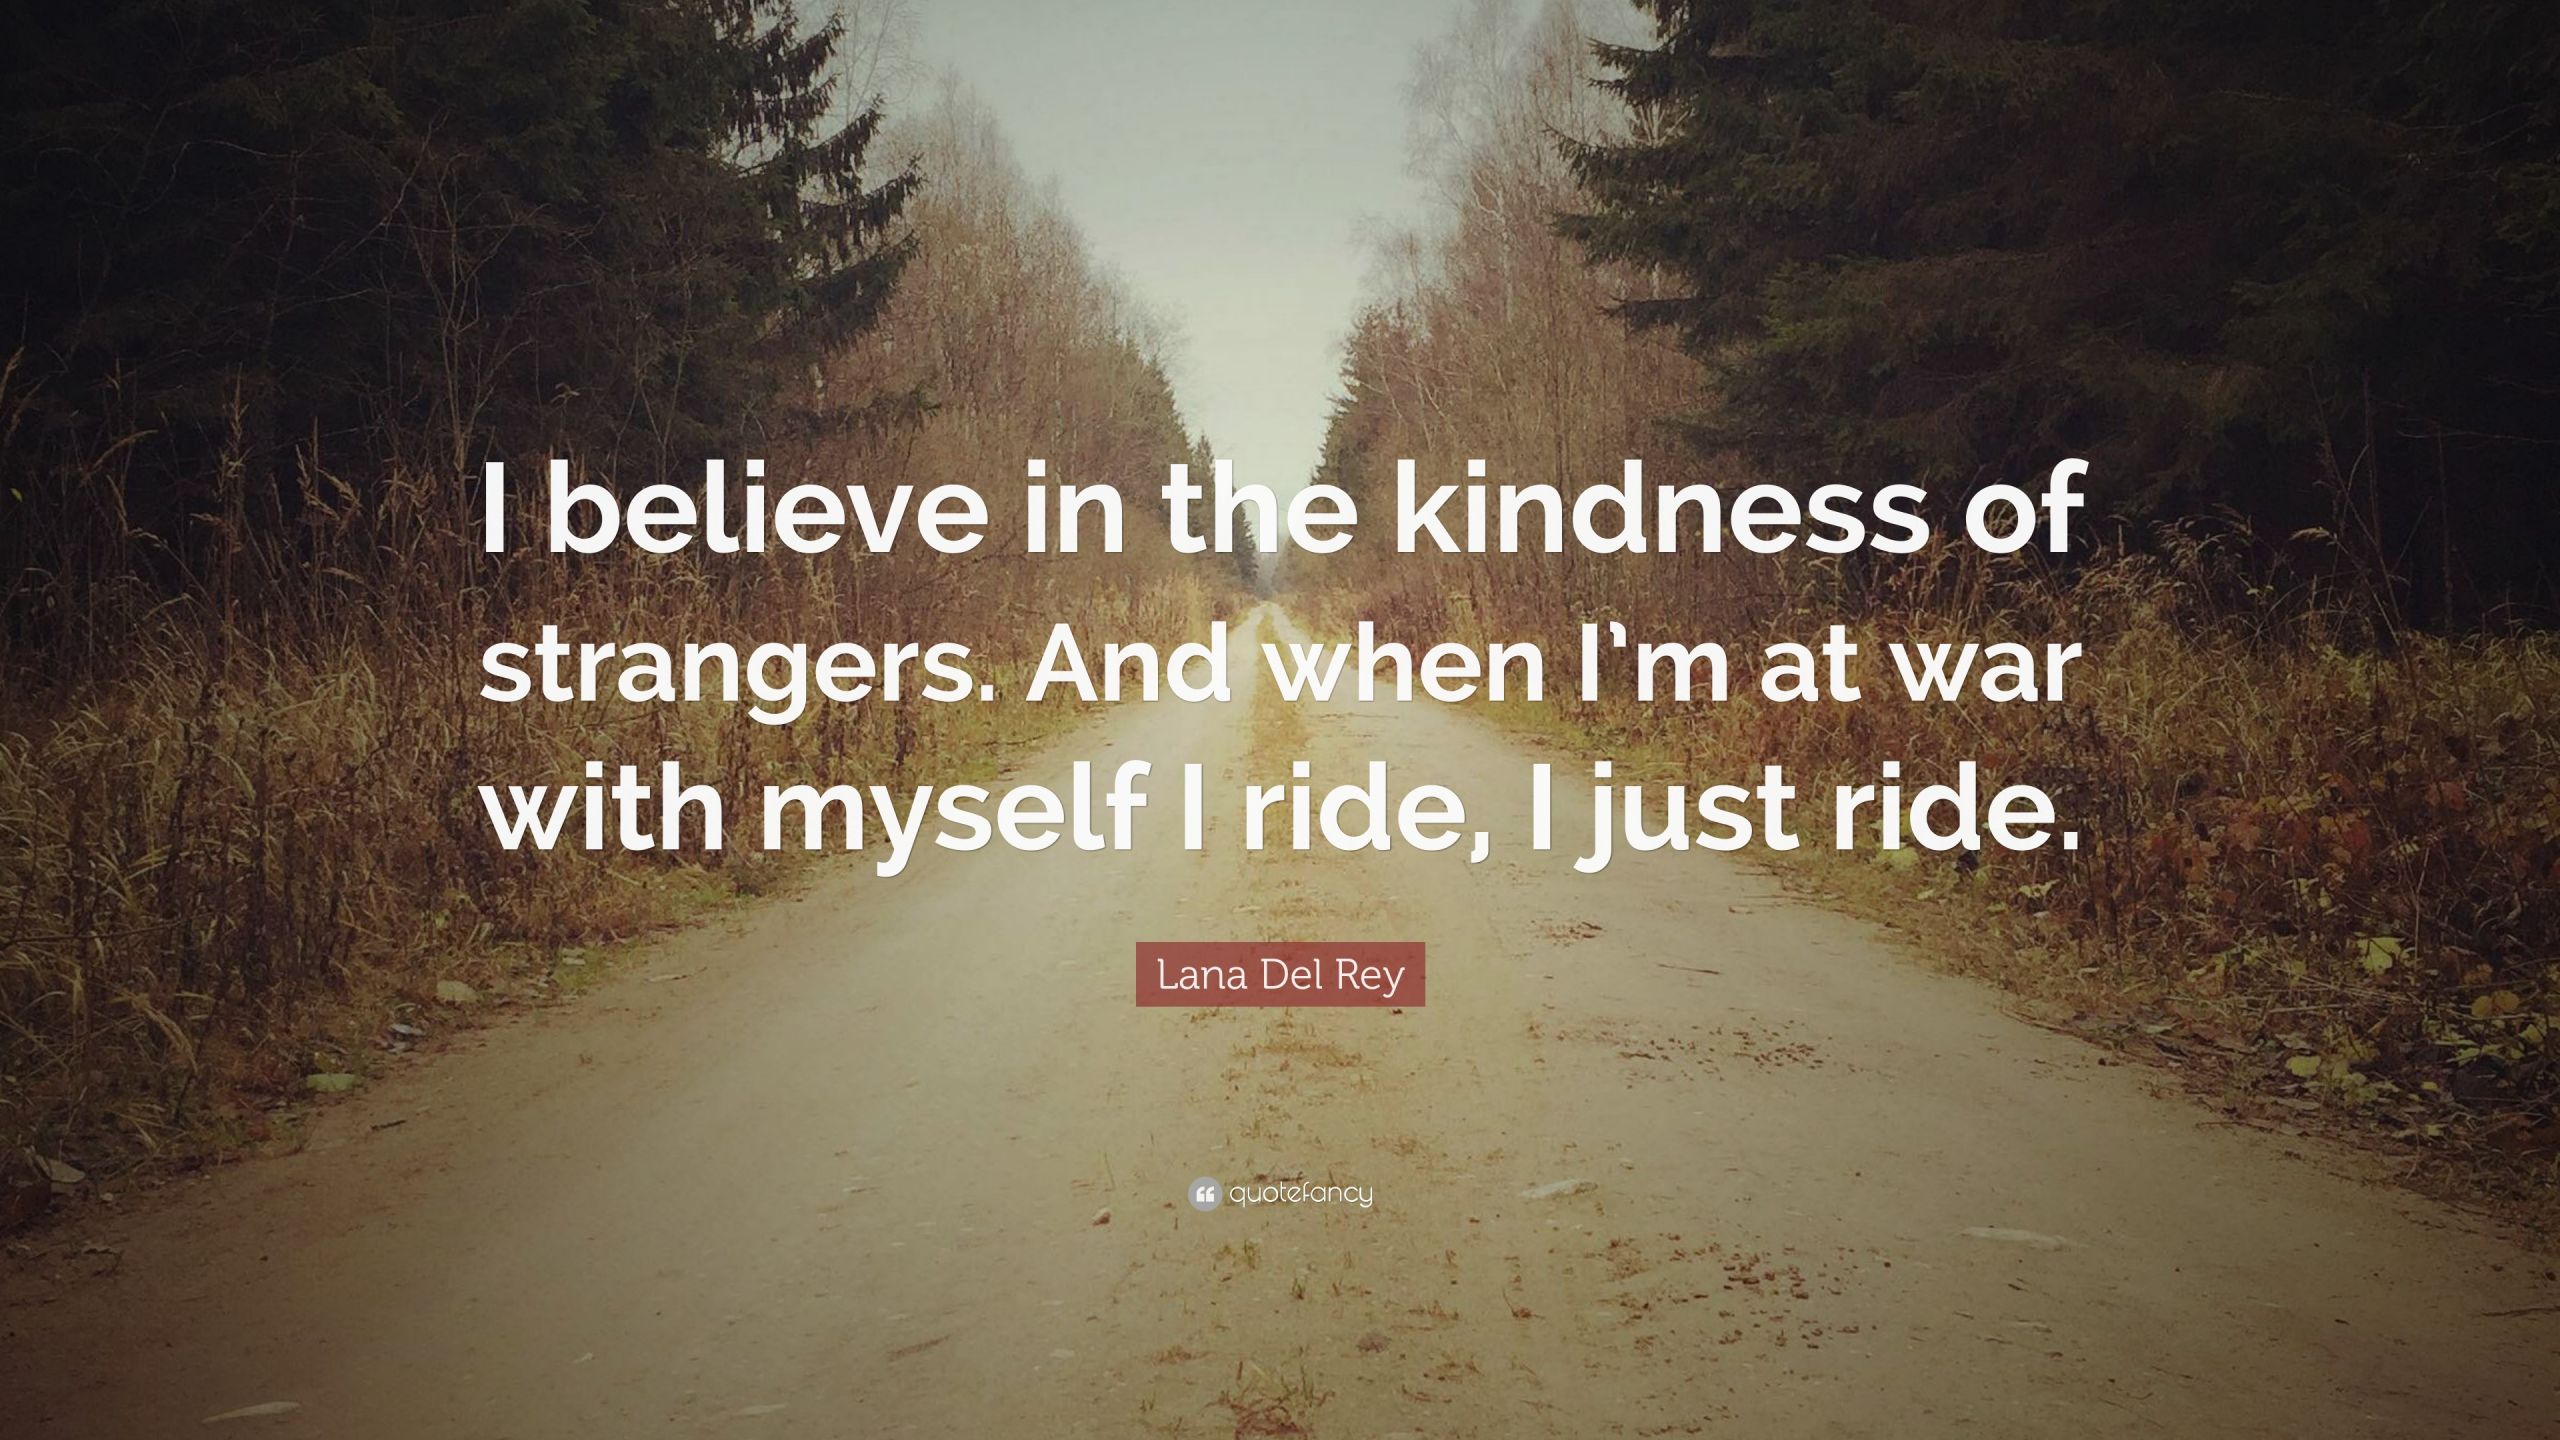 Kindness Of Strangers Quote
 Lana Del Rey Quote “I believe in the kindness of